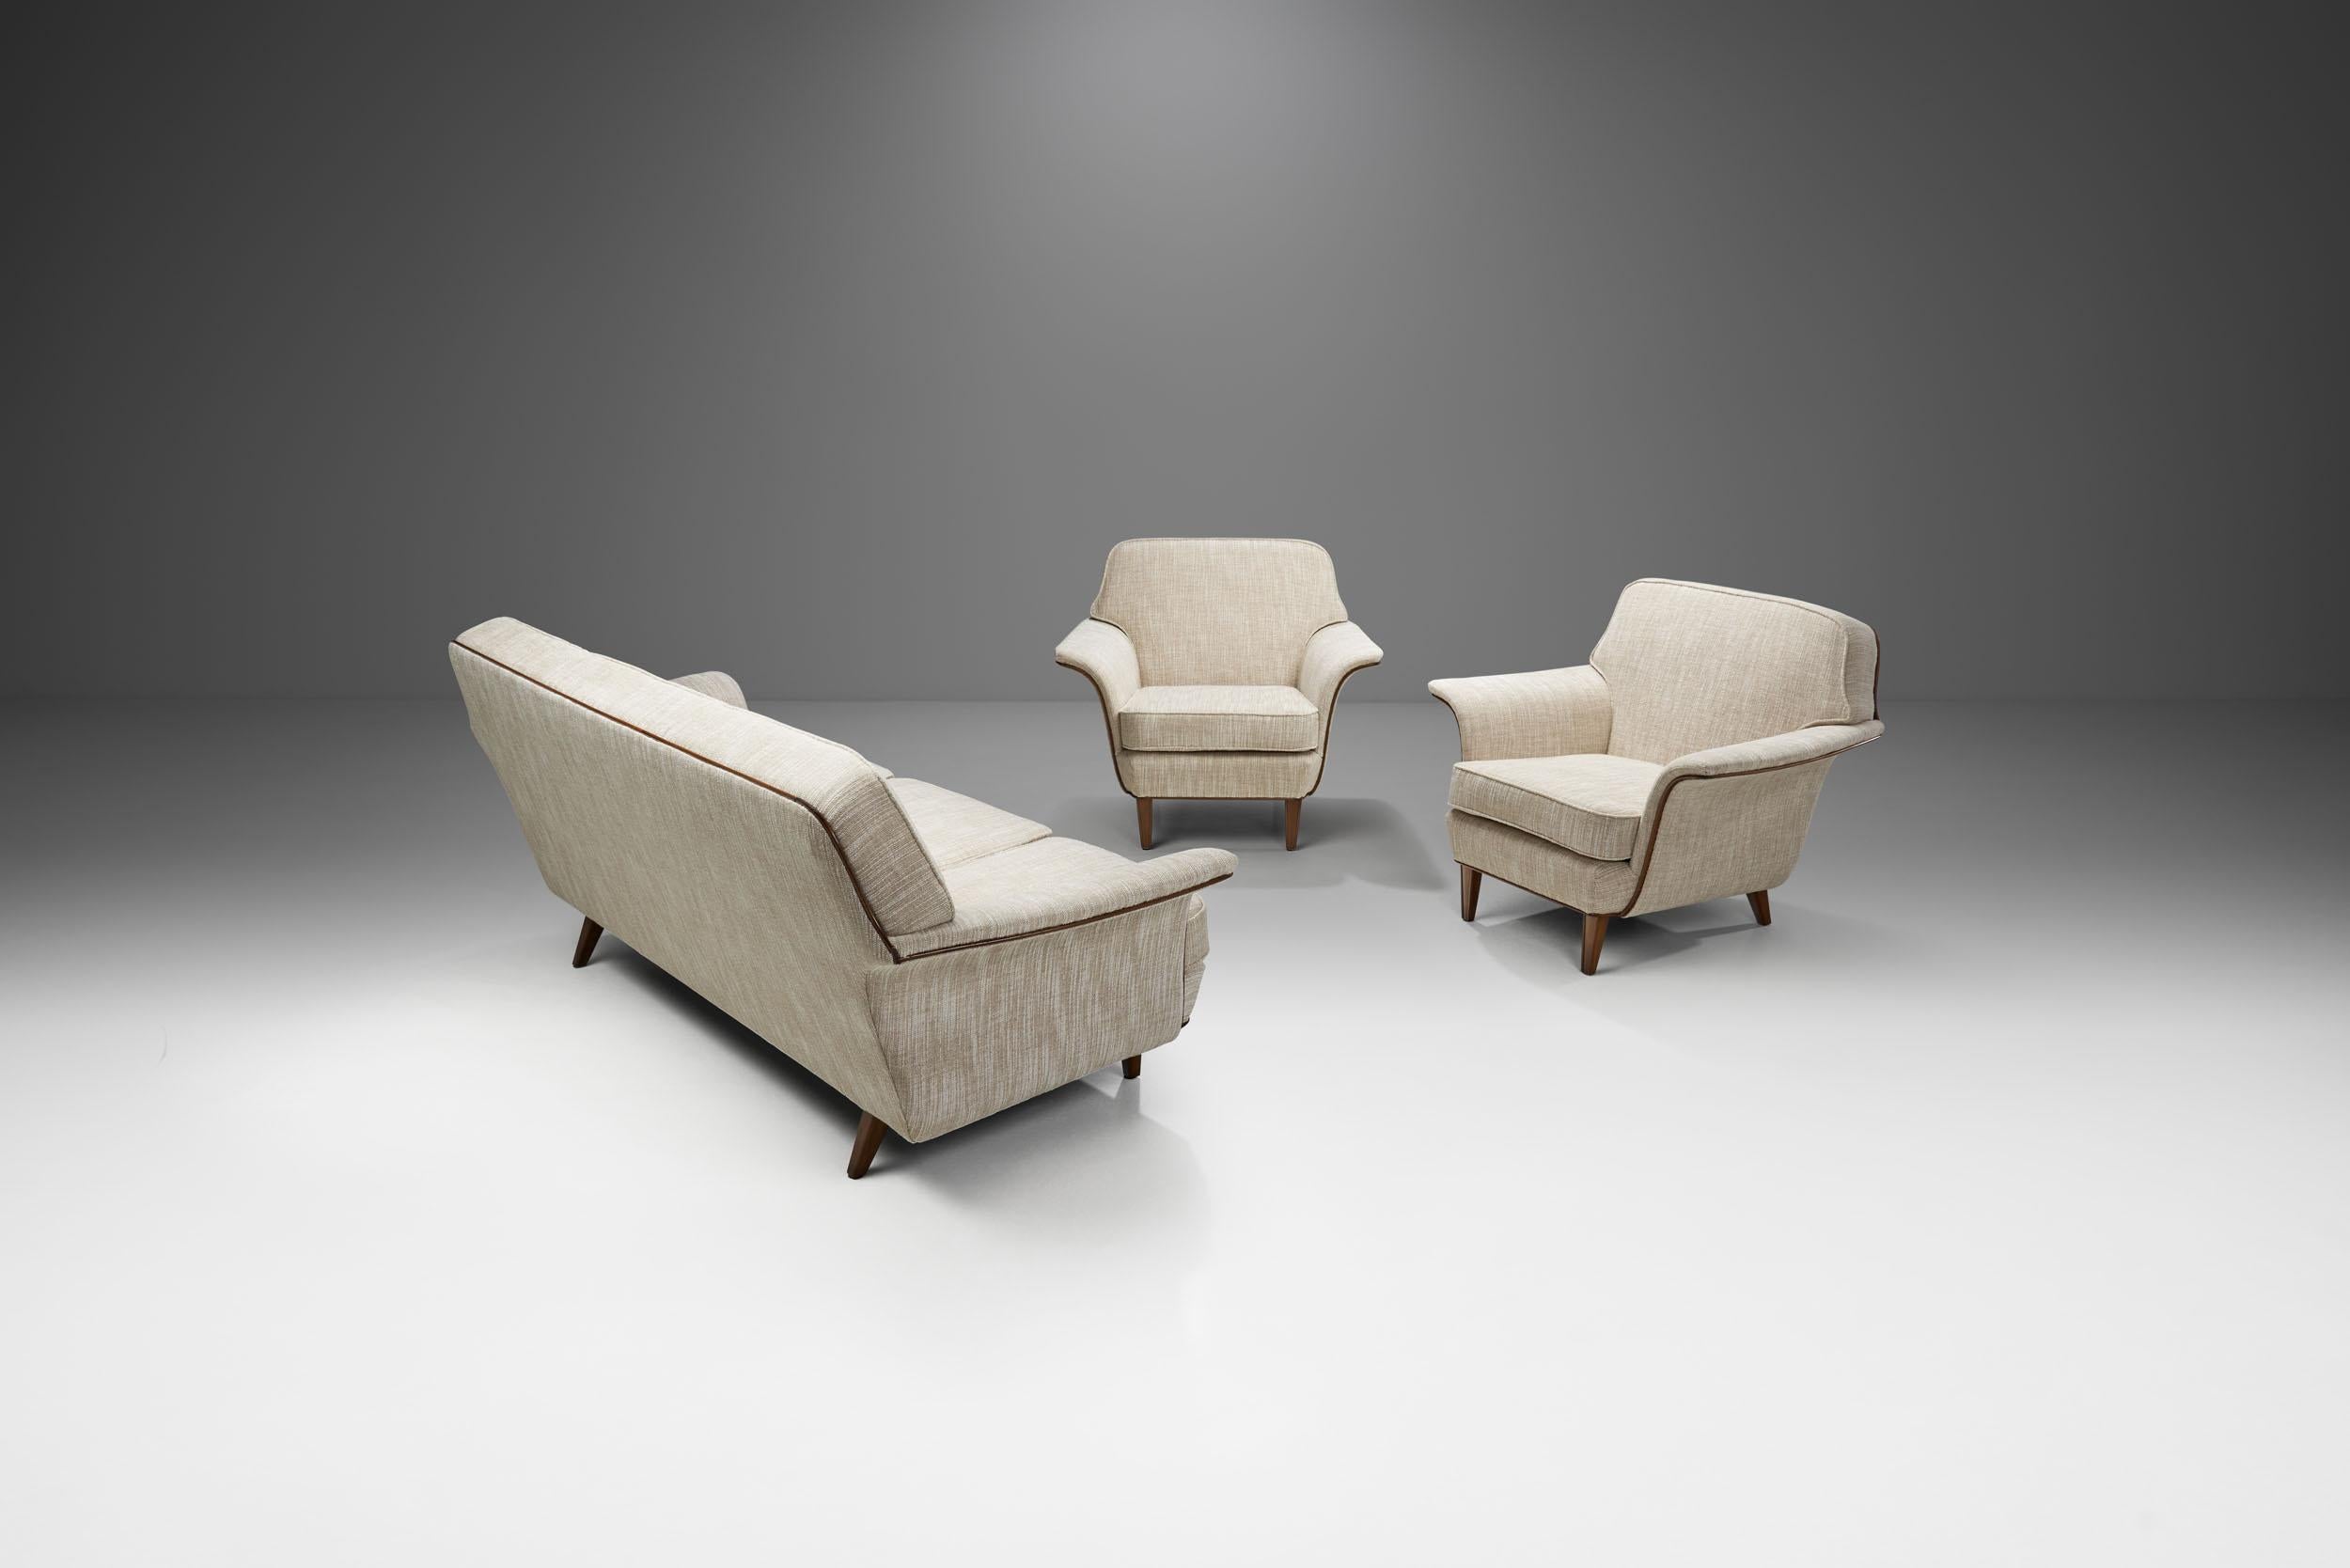 Mid-20th Century Swedish Cabinetmaker Sofa and Armchairs, Sweden, 1950s For Sale